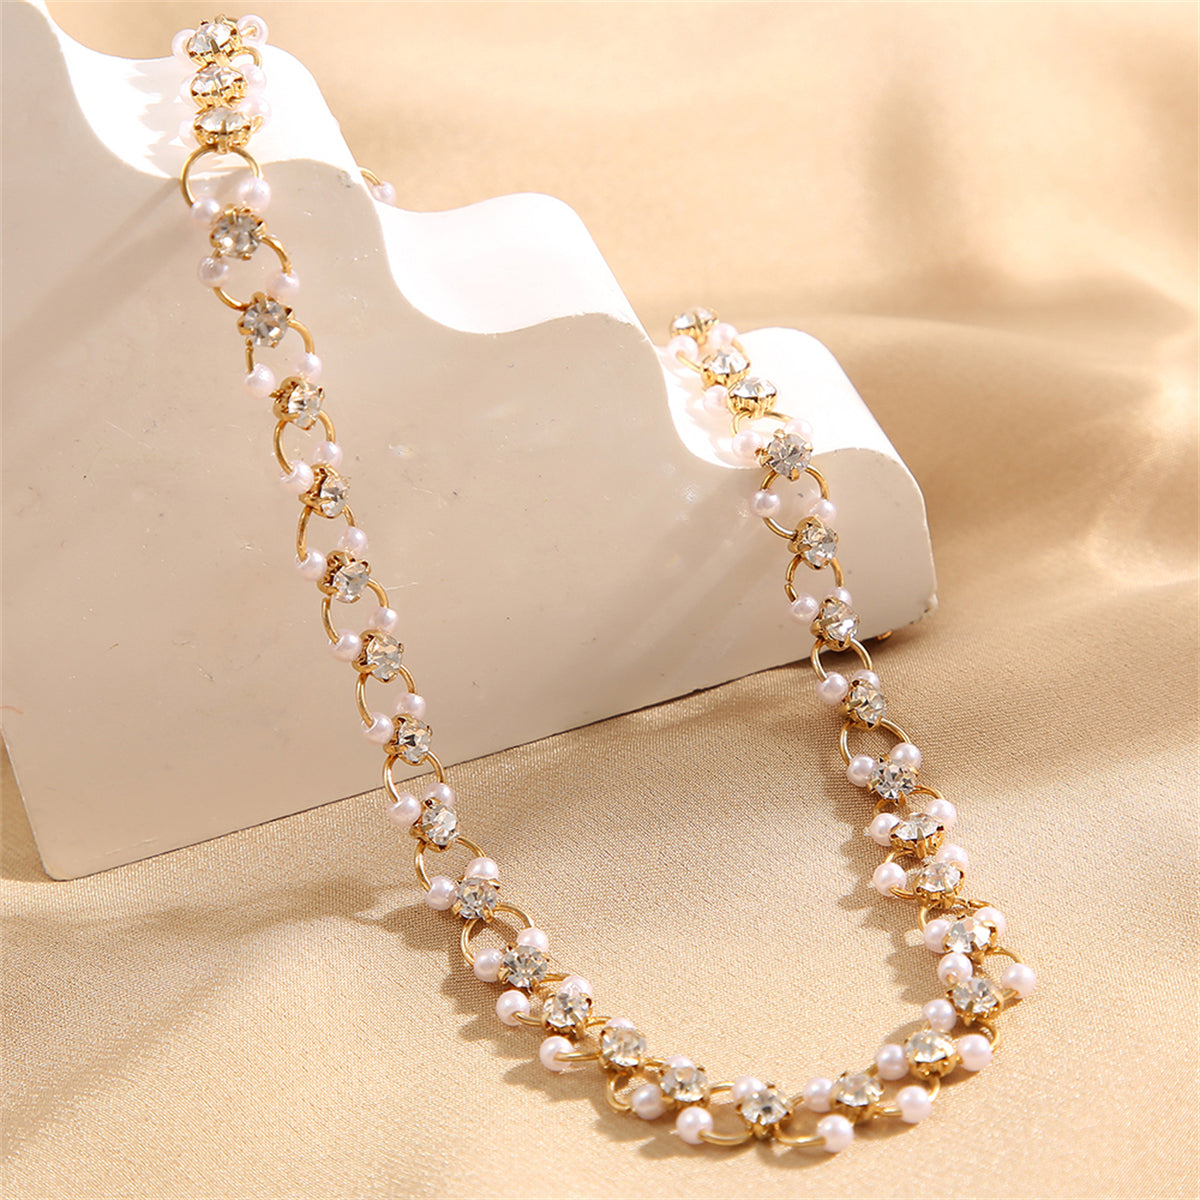 Cubic Zirconia & Pearl 18K Gold-Plated Curb Chain Choker Necklace